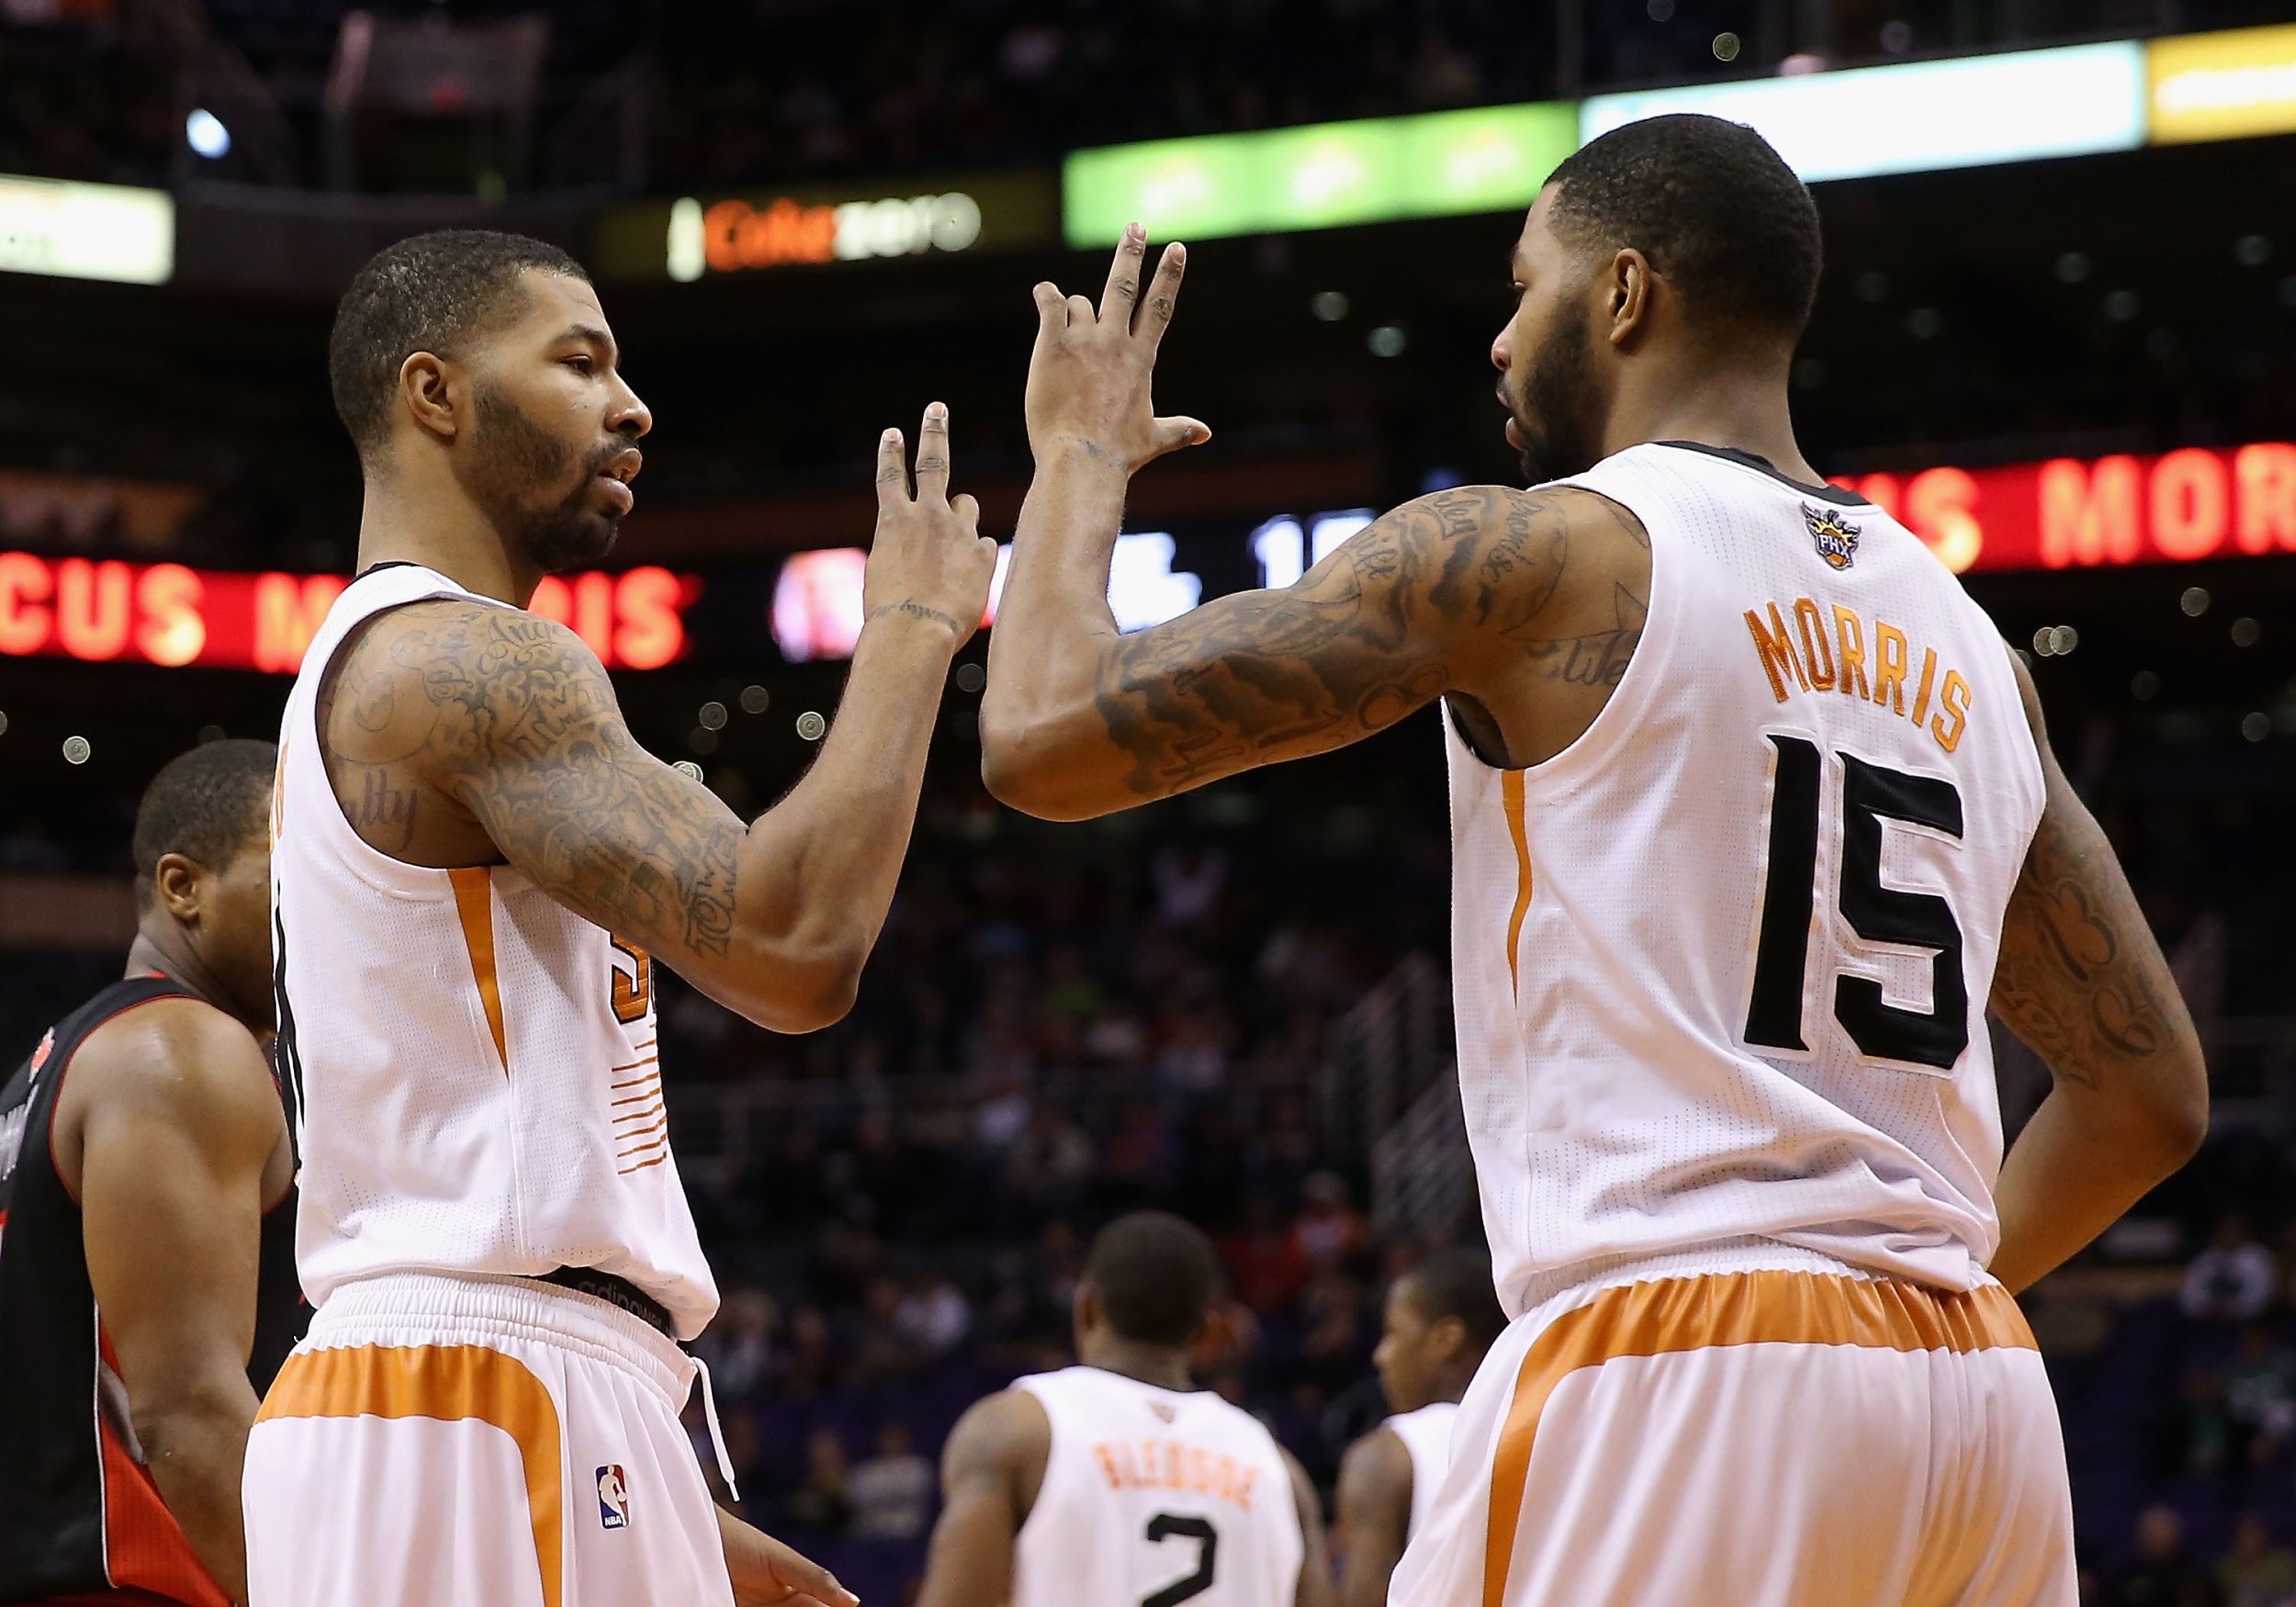 Markieff Morris looking to join brother Marcus on Clippers